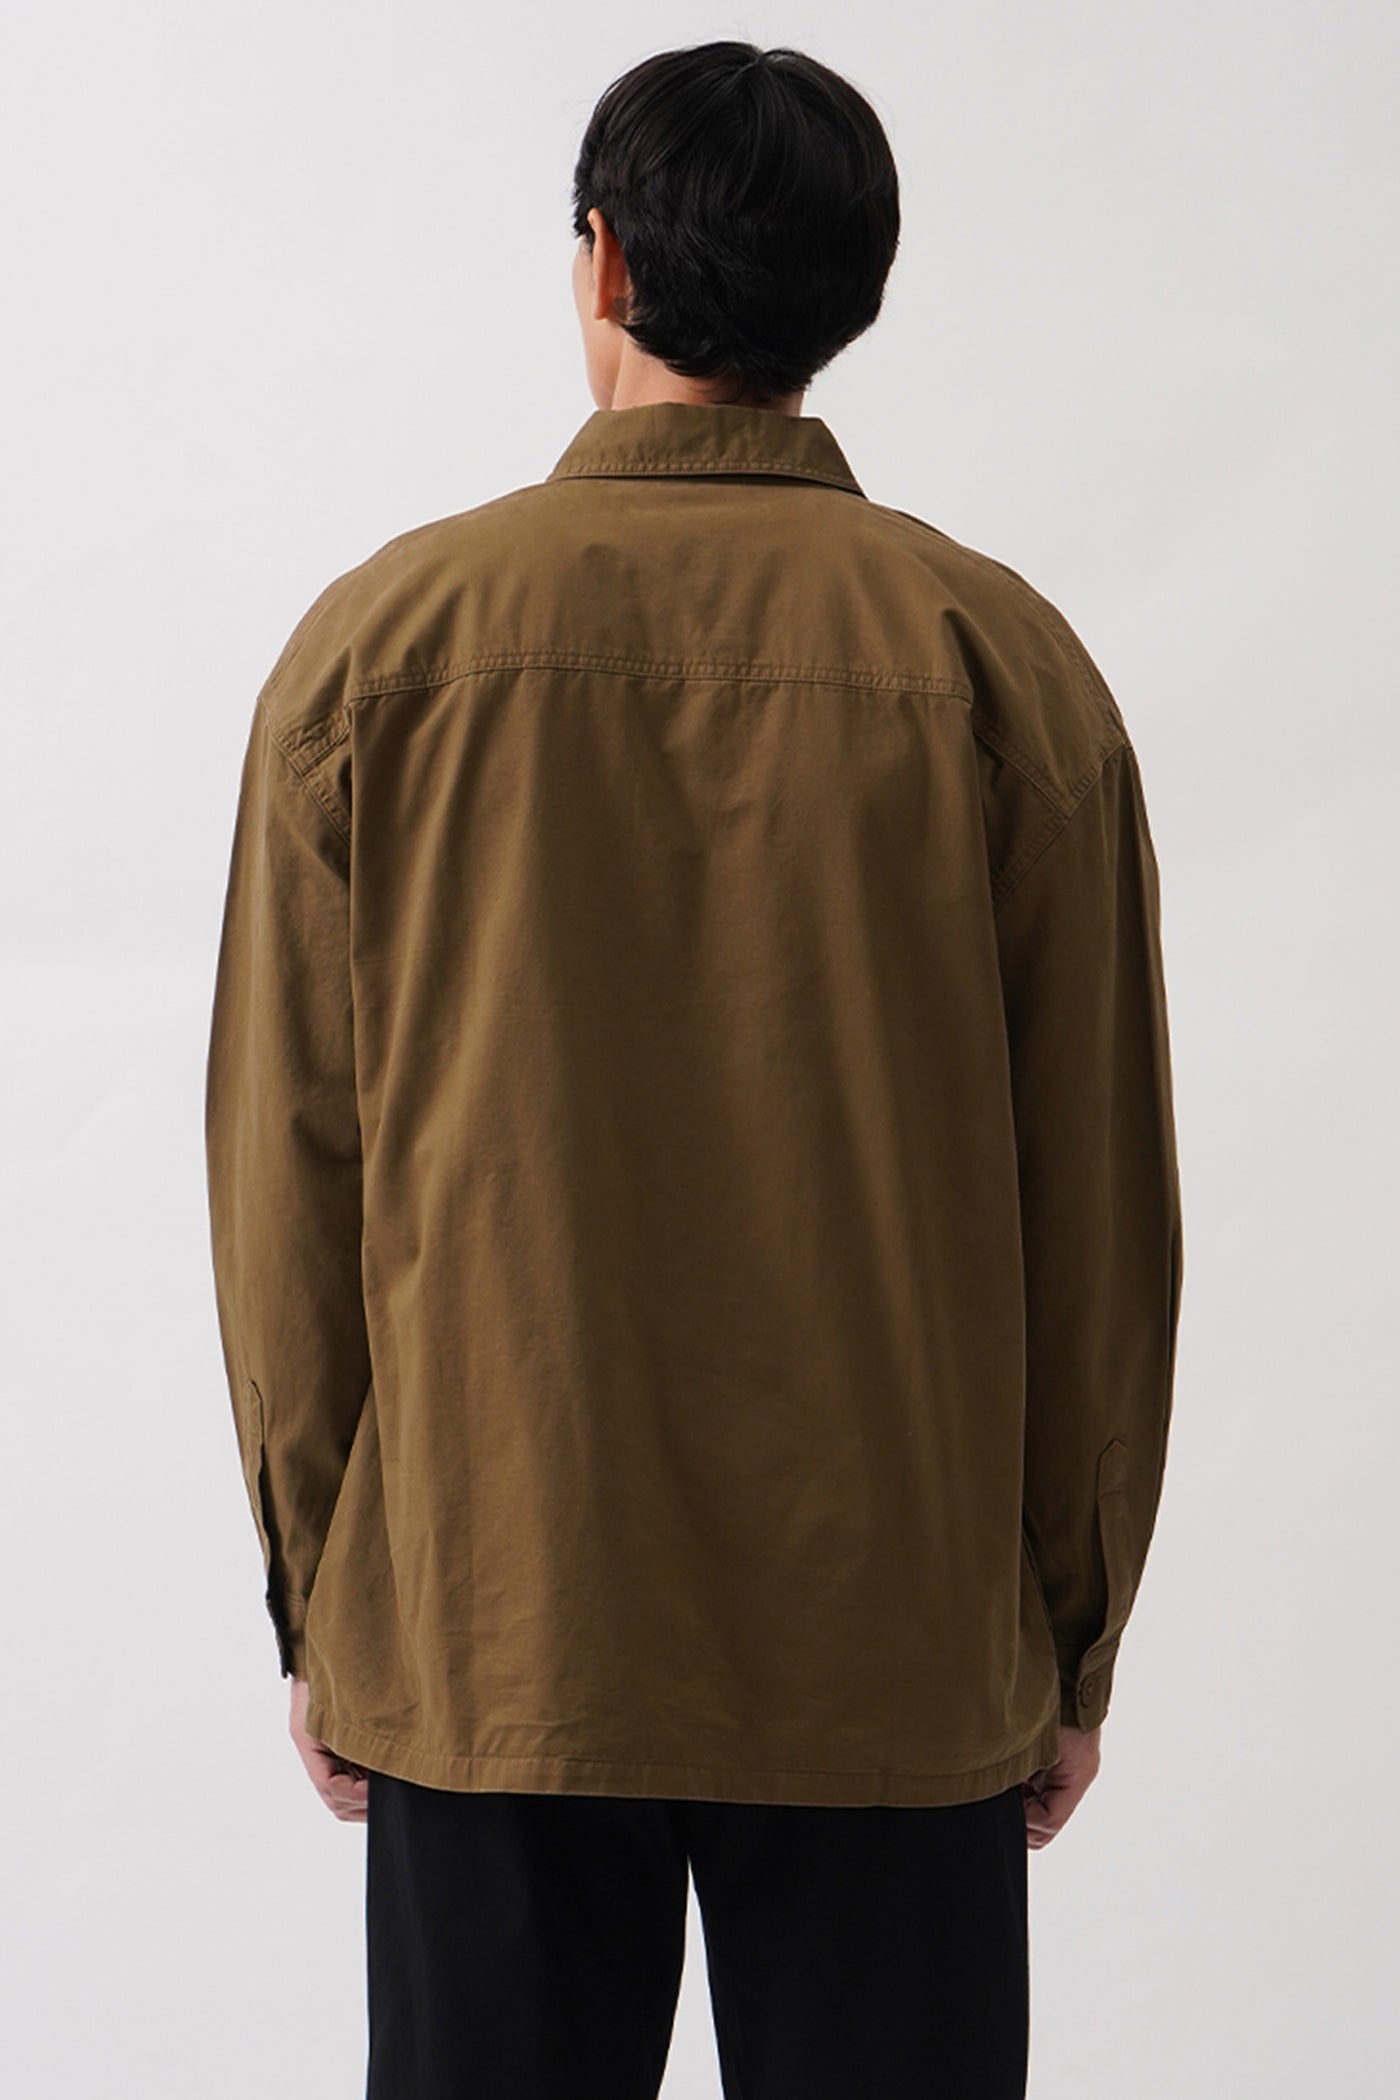 Men's Button Front Overshirt with Pocket